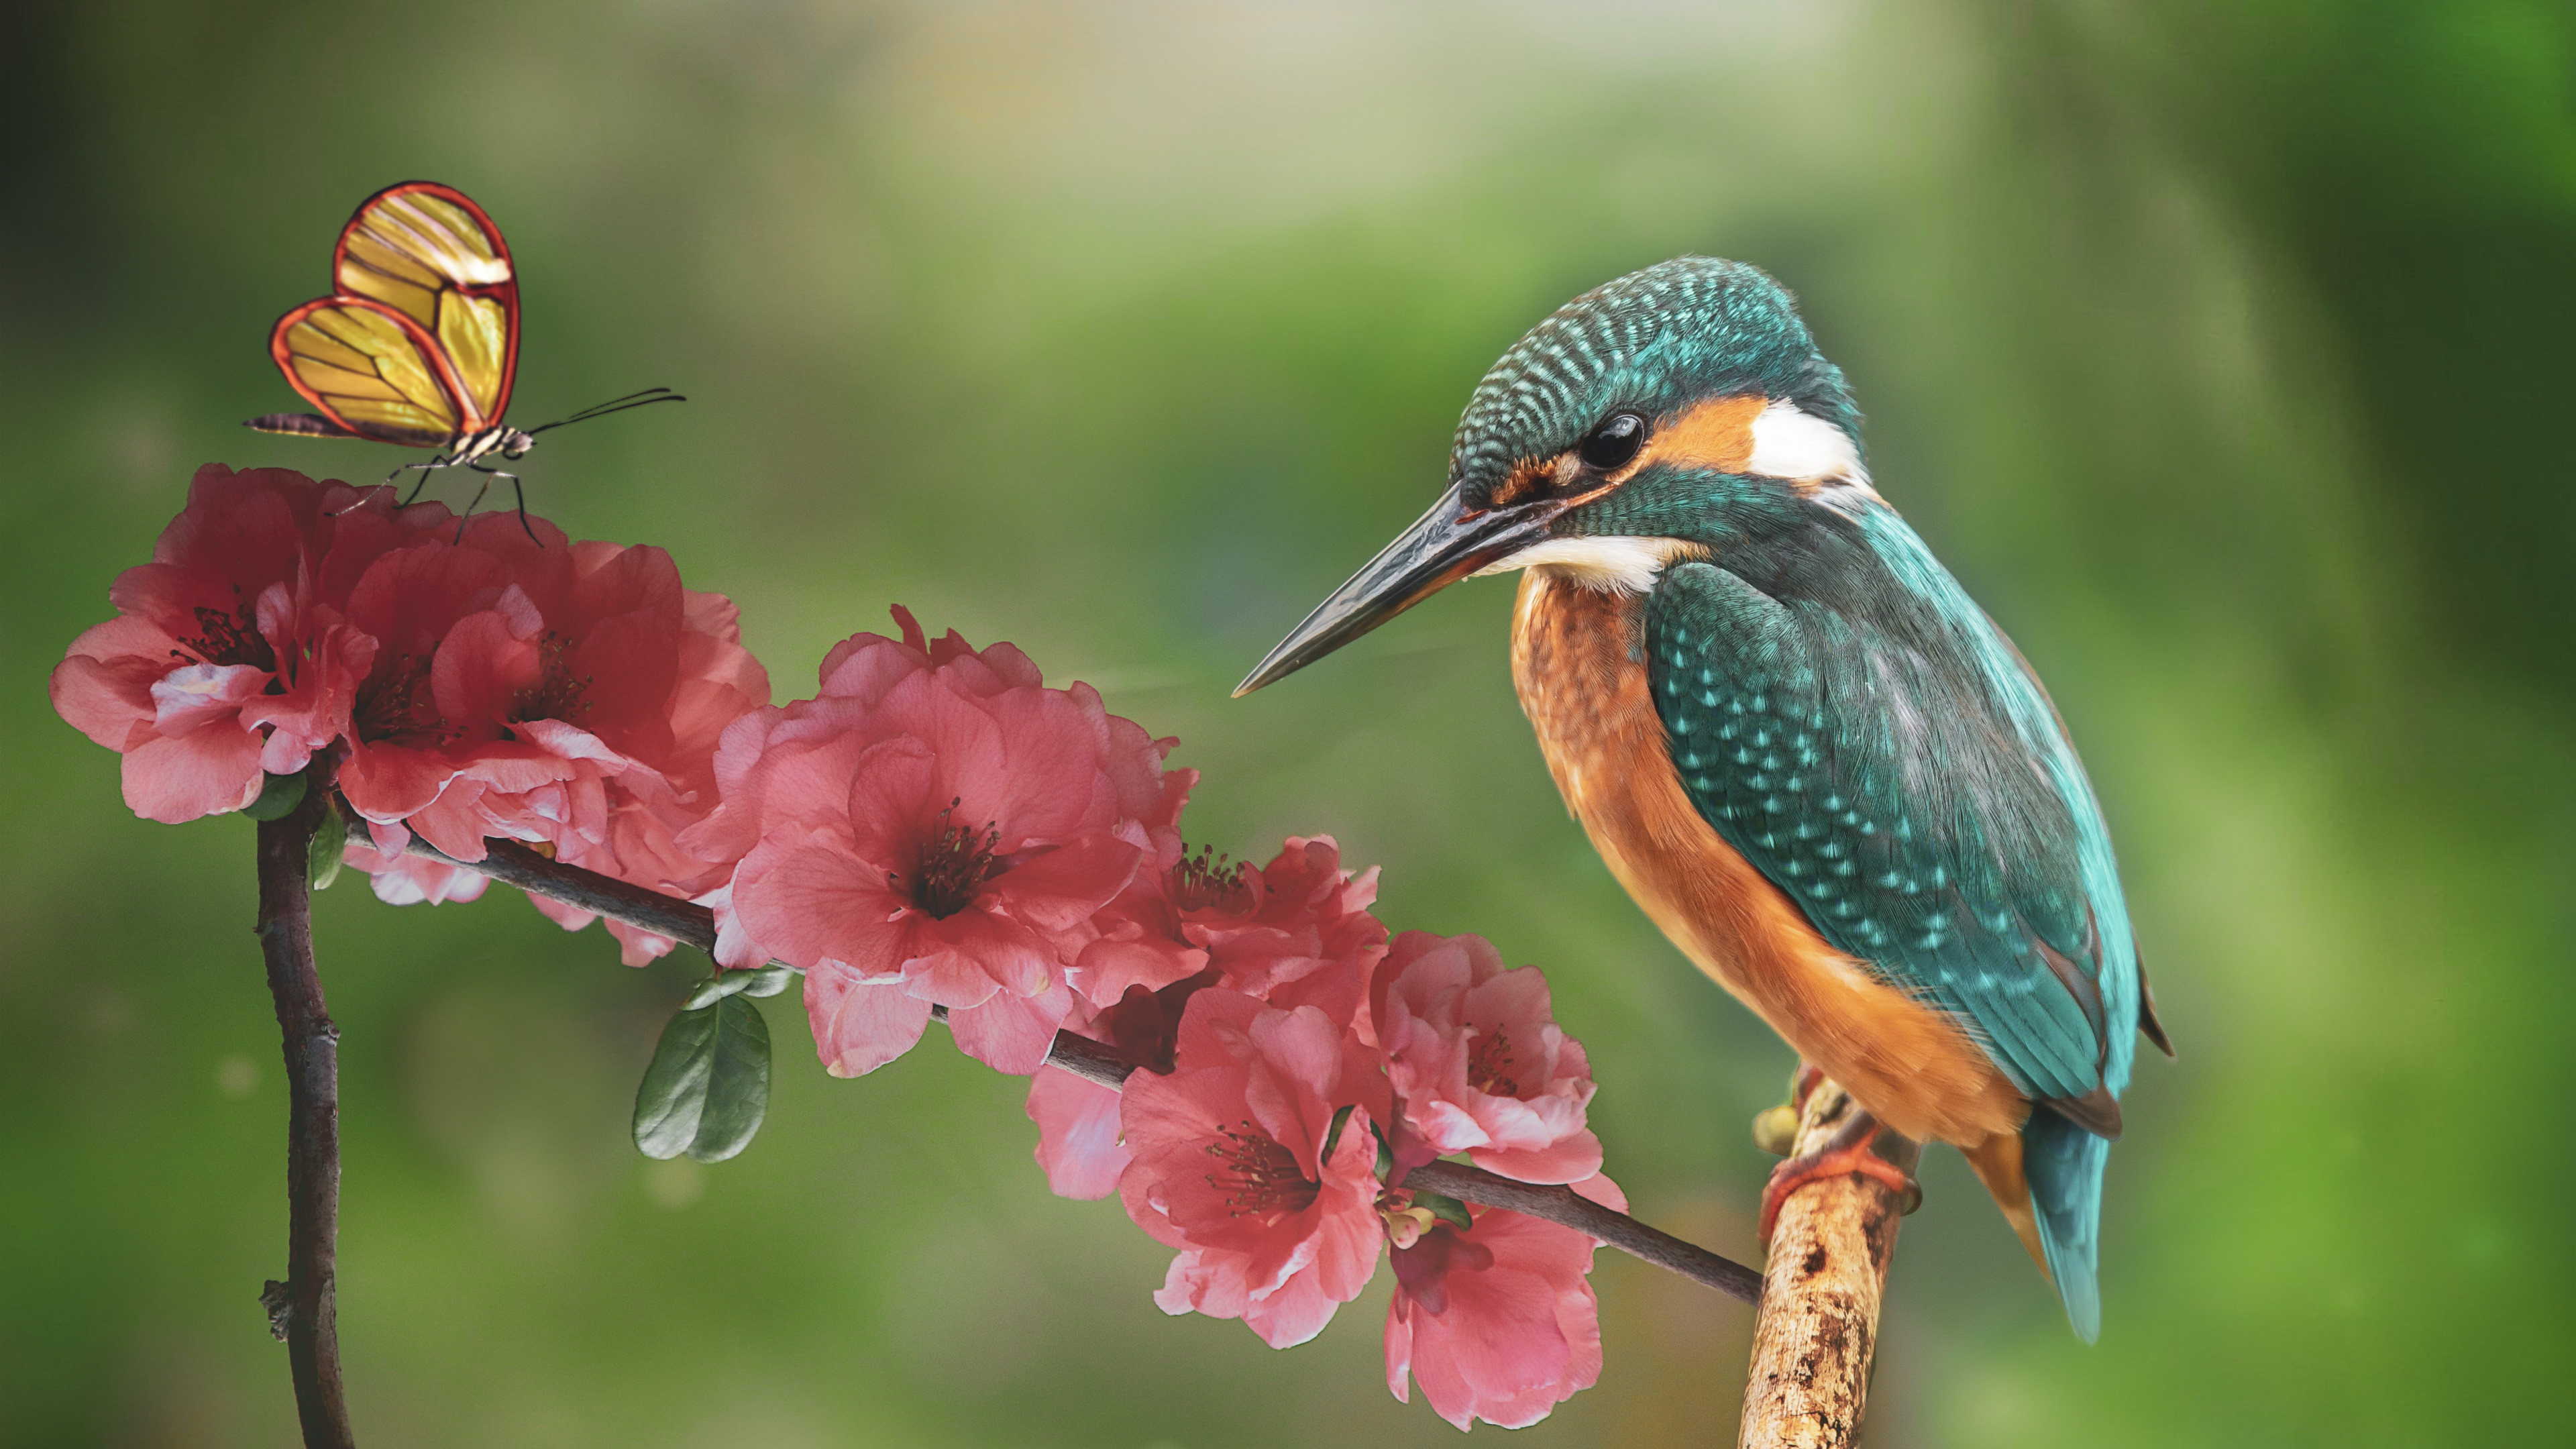 Kingfisher and the butterfly wallpaper 3840x2160